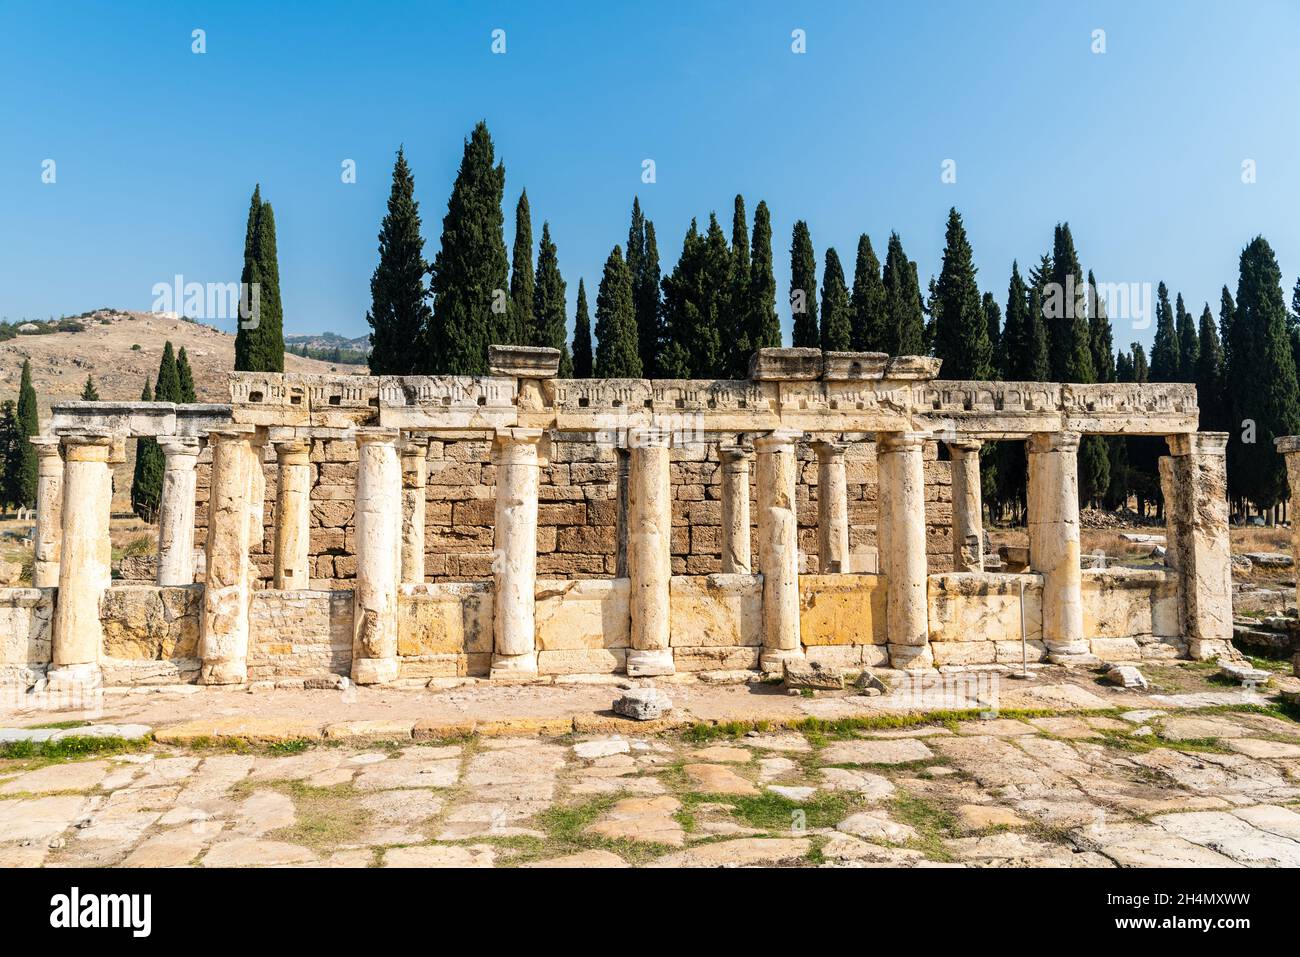 Ruins of ancient latrine toilet at Hierapolis ancient site in Denizli province of Turkey. Hierapolis was an ancient Greek city located on hot springs Stock Photo